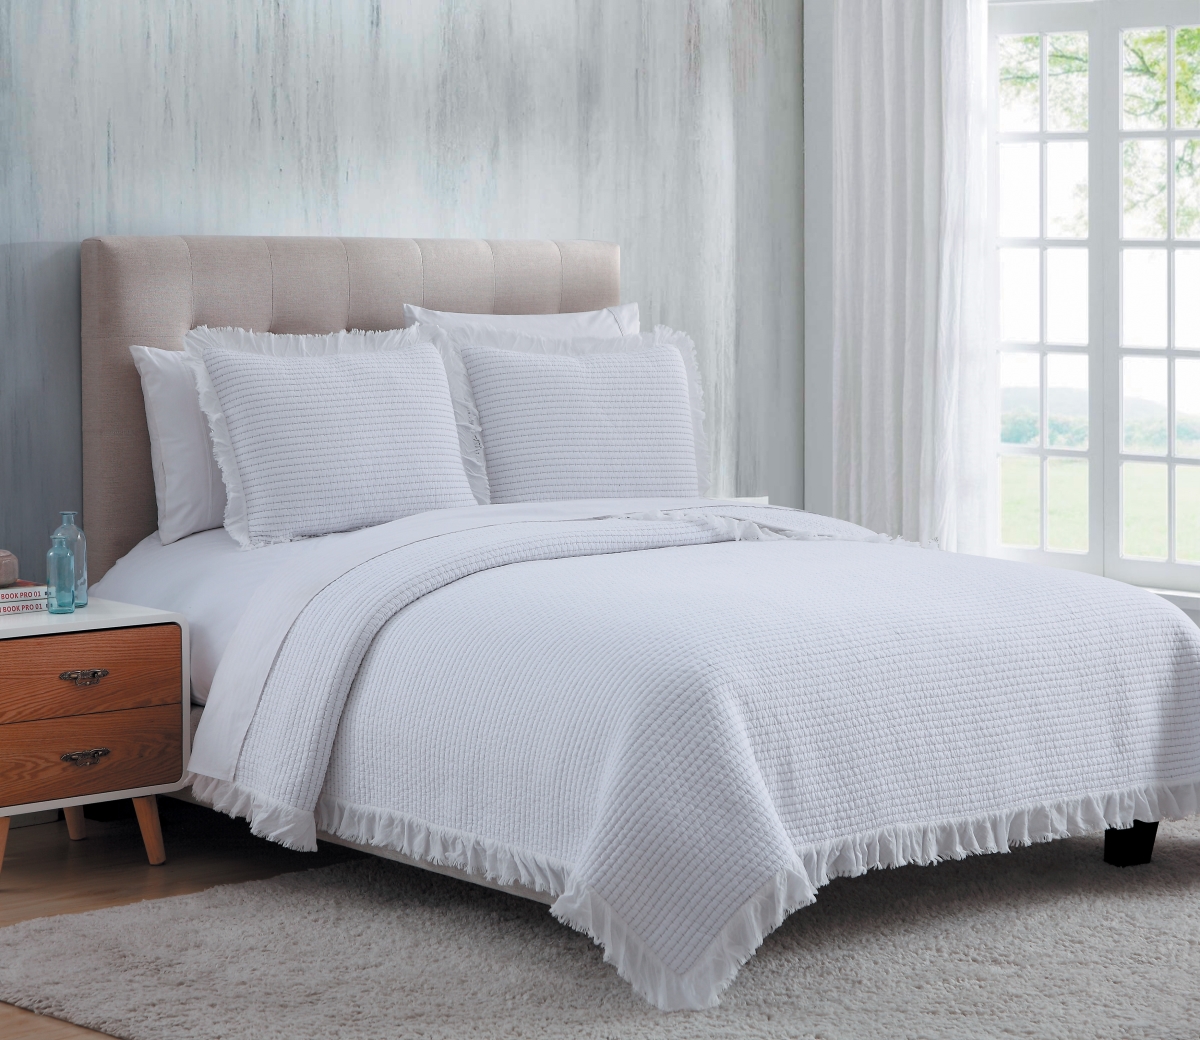 Q170.w10494 Beautiful Cotton Quilt Set With Textured Design & Fringed Borders, White